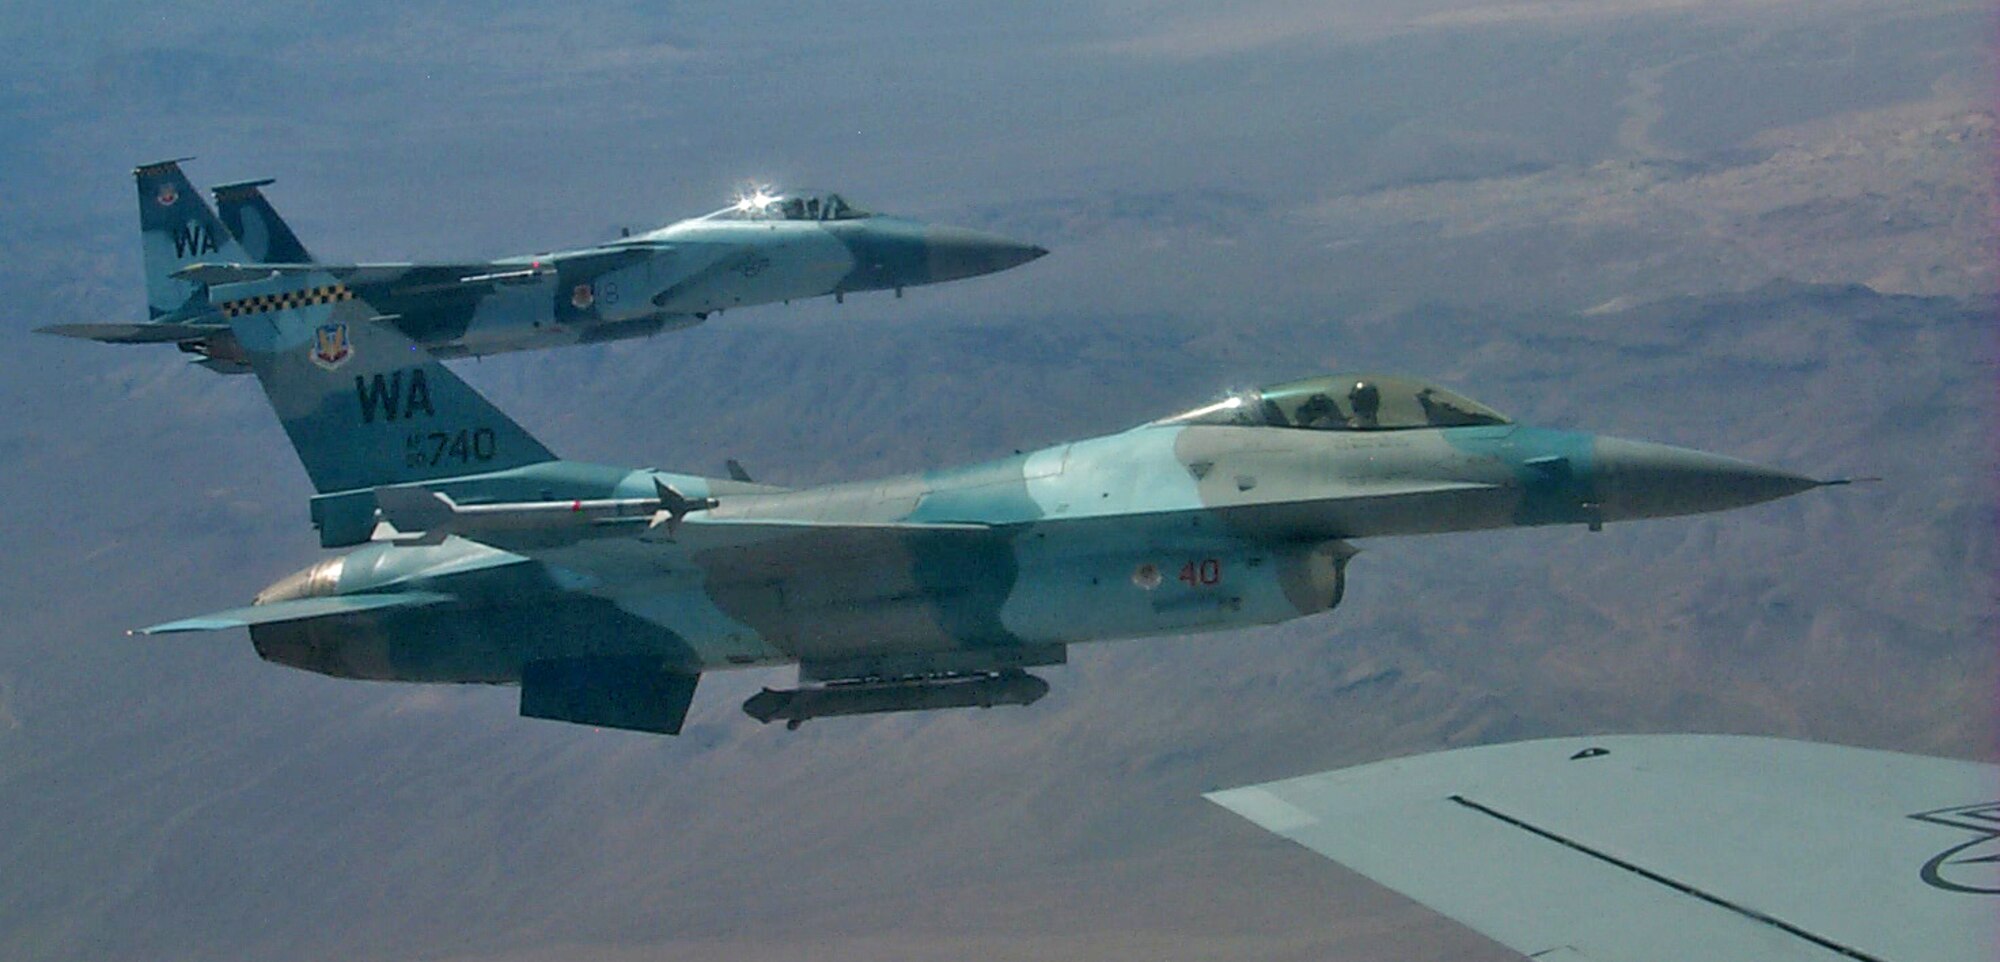 F-16 and F-15 Aggressor aircraft from Nellis AFB, Nev., fly in formation with a KC-135 tanker from the 6th Air Mobility Wing, MacDill AFB, Fla., Aug. 18. The Aggressors act as "enemy" aircraft during the Red Flag exercise which continues through Sept. 2. The F-15 Aggressors belong to the 65th Aggressor Squadron, while the F-16s belong to the 64th Aggressor Squadron. (U.S. Air Force photo/Mike Estrada)